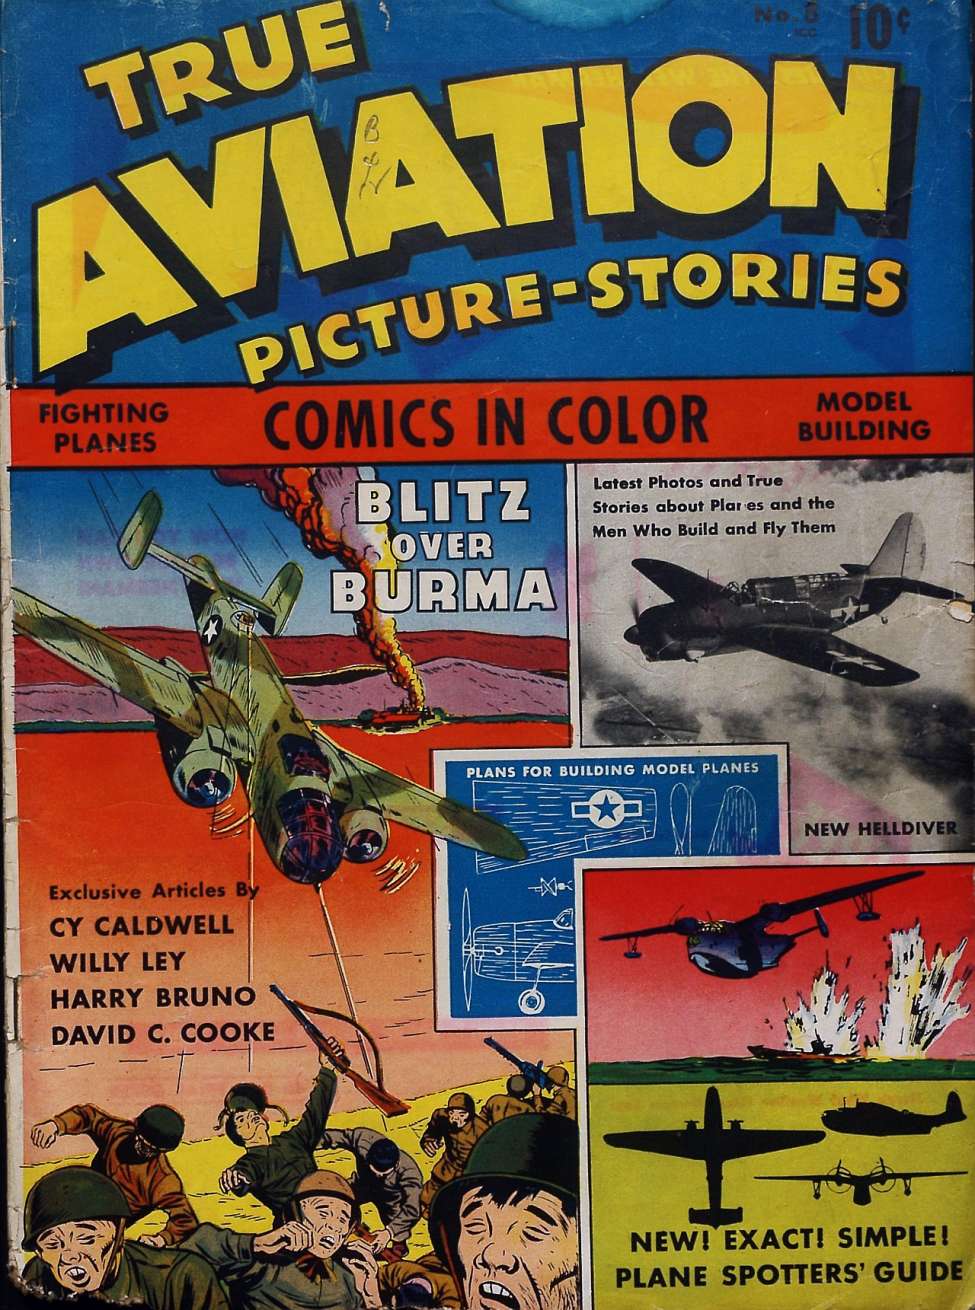 Comic Book Cover For True Aviation Picture Stories 8